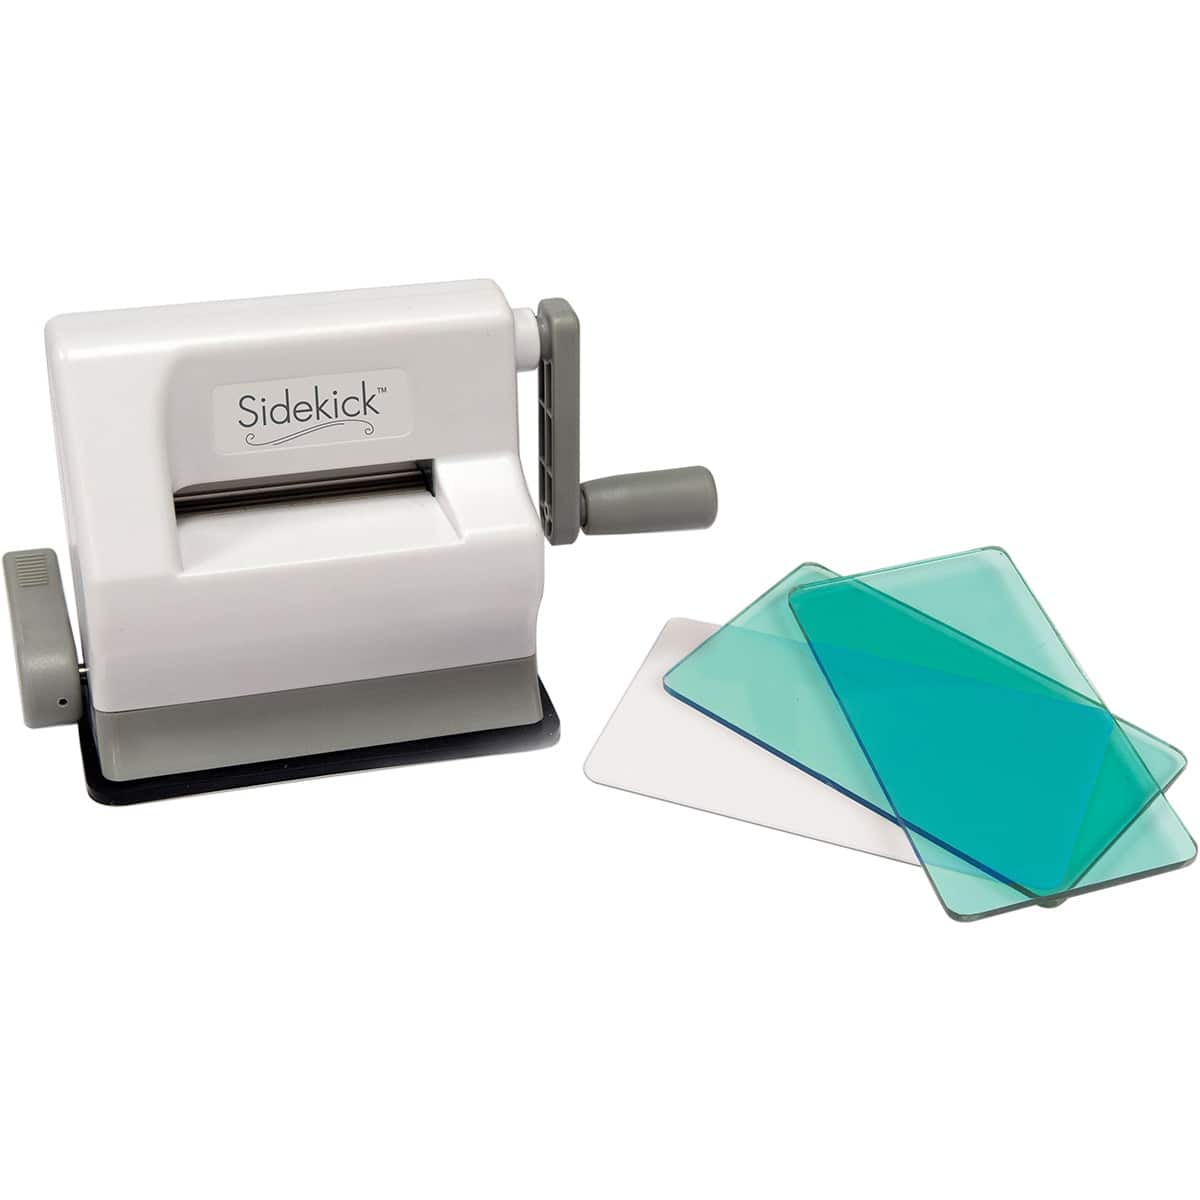 Shop Sizzix Big Shot with great discounts and prices online - Nov